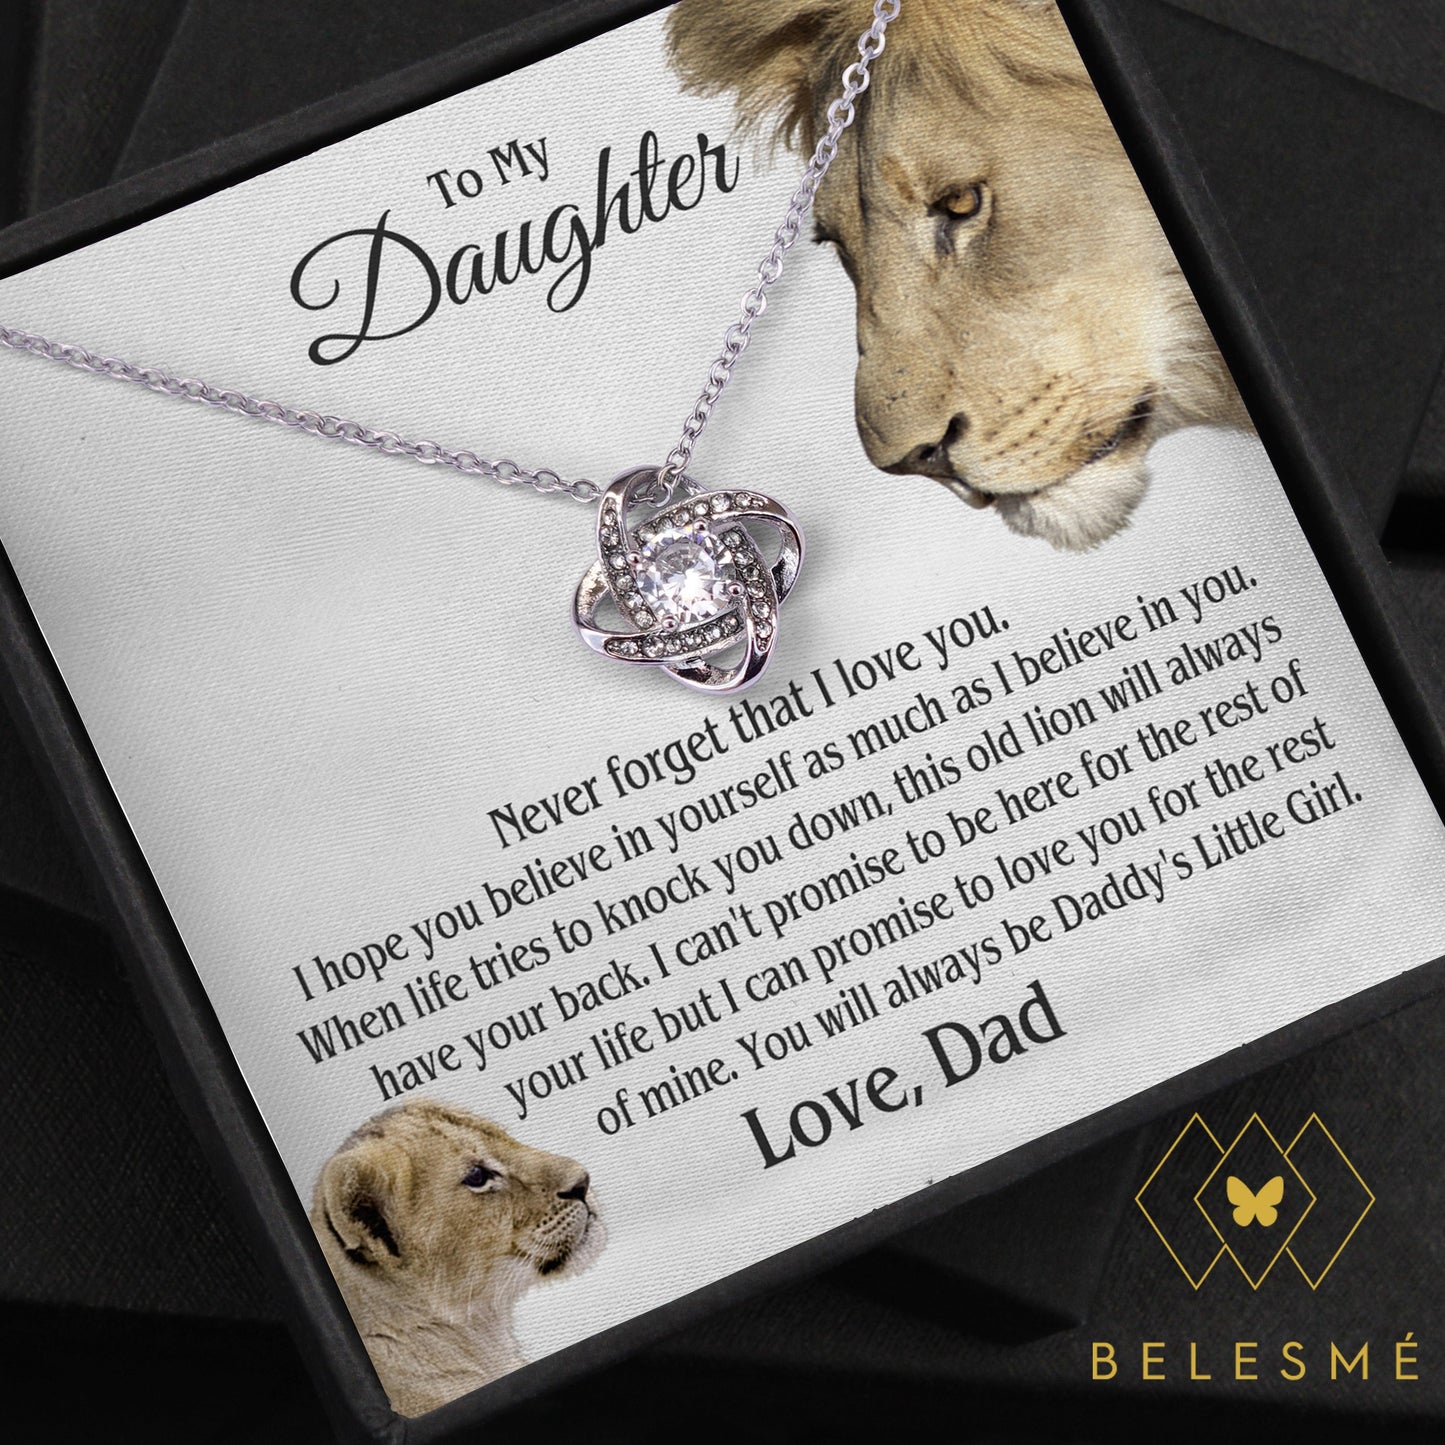 Jewelry gifts Daughter - Believe in yourself - Necklace - Belesmé - Memorable Jewelry Gifts 